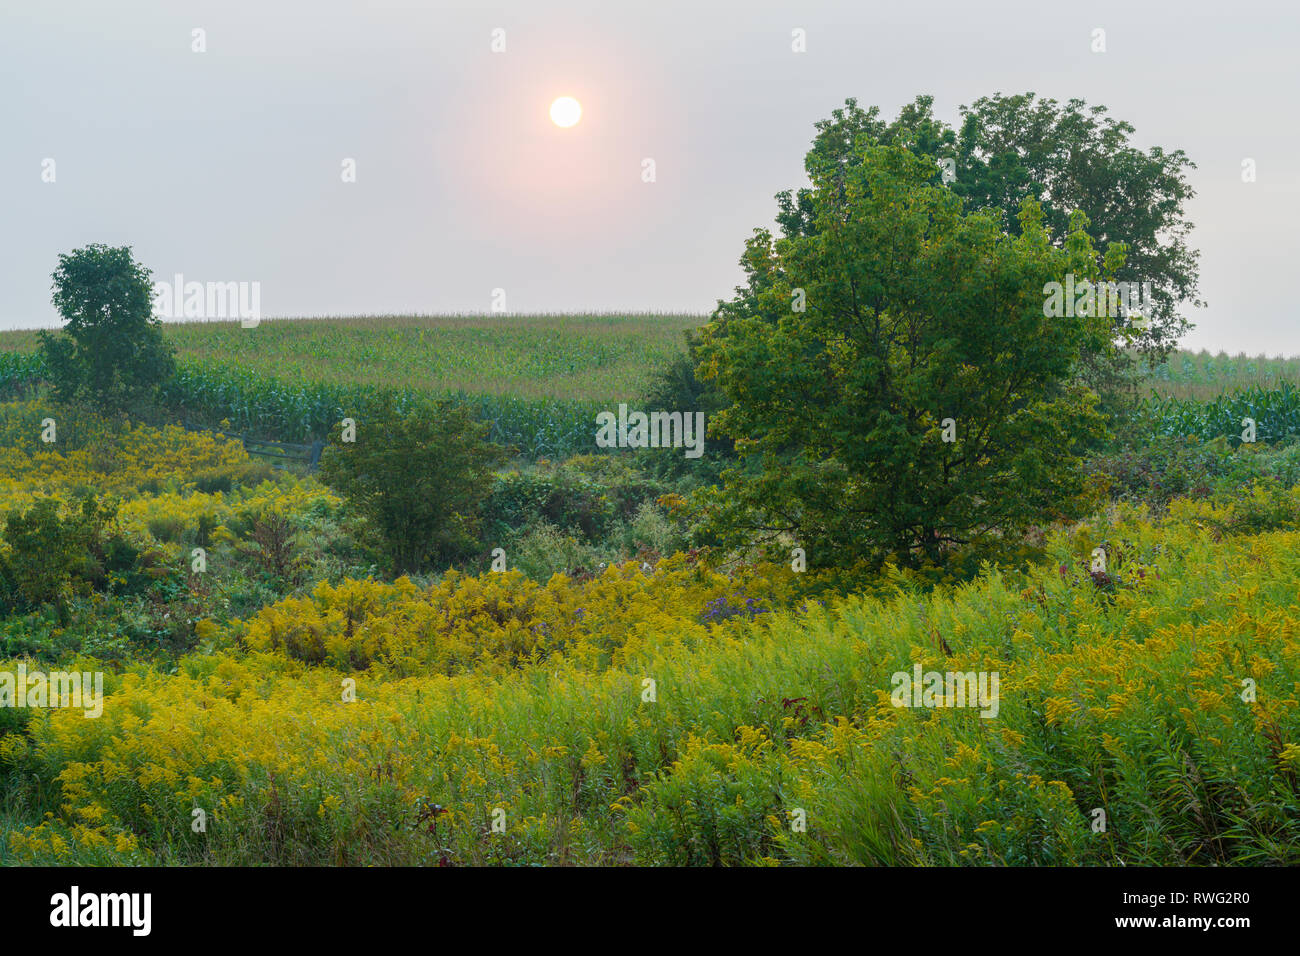 Sun rises through mist with goldenrod and vetch at edge of corn crop. Nr Elora, Ontario, Canada Stock Photo